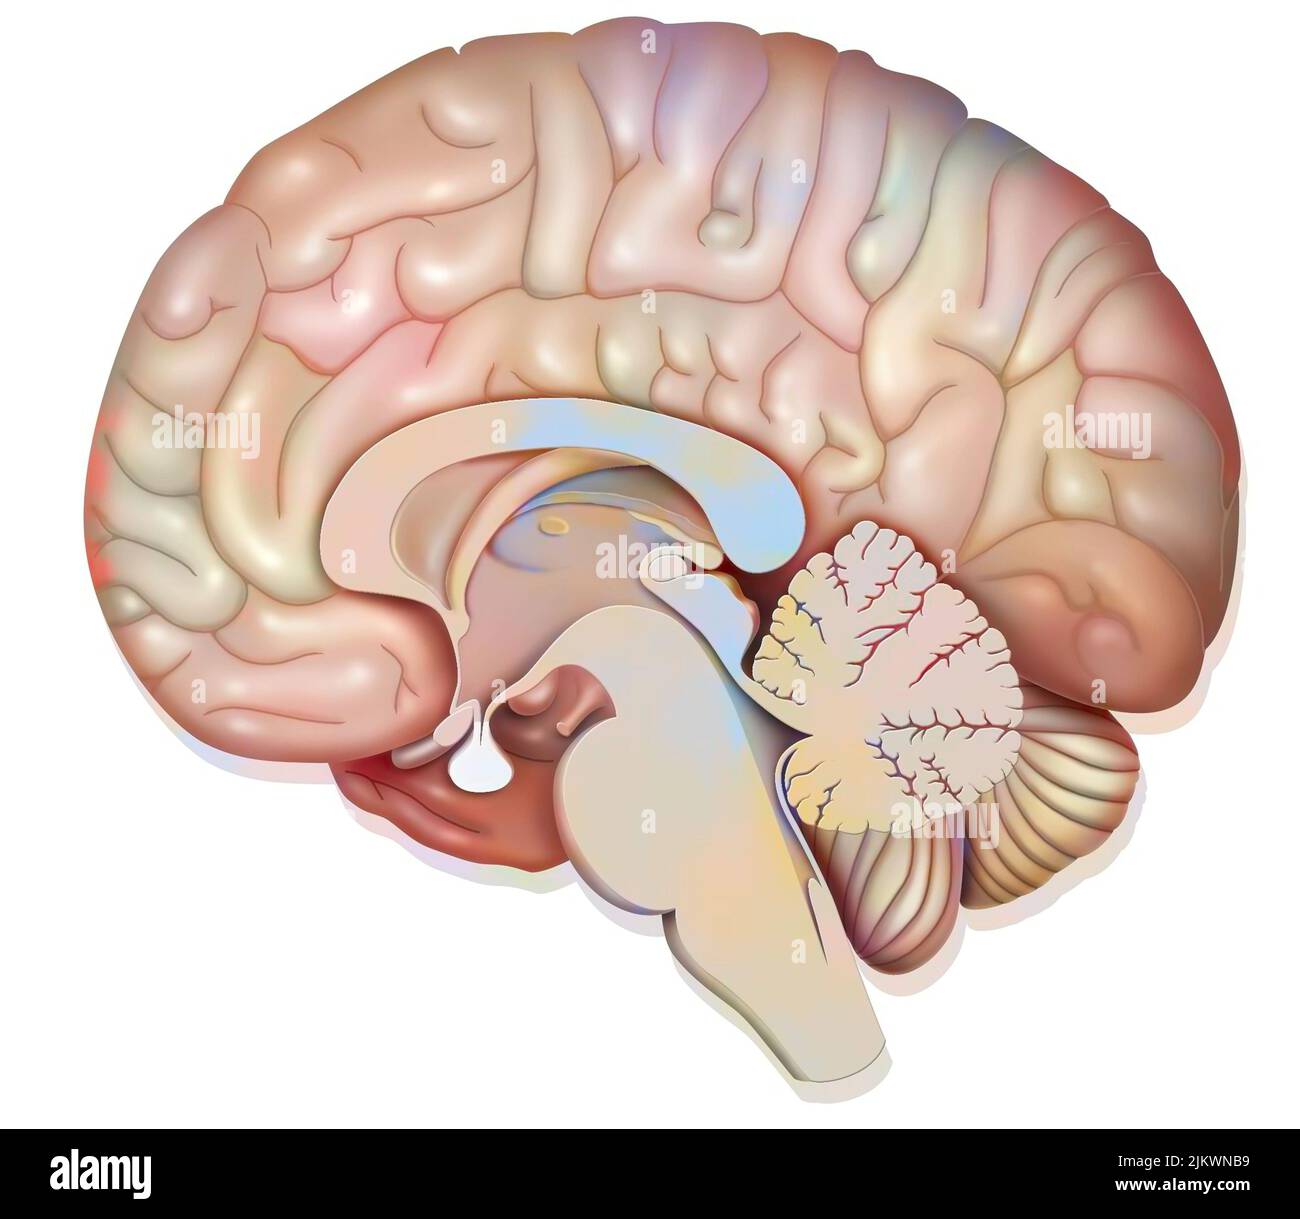 Median sagittal section of the human brain showing the pituitary gland. Stock Photo